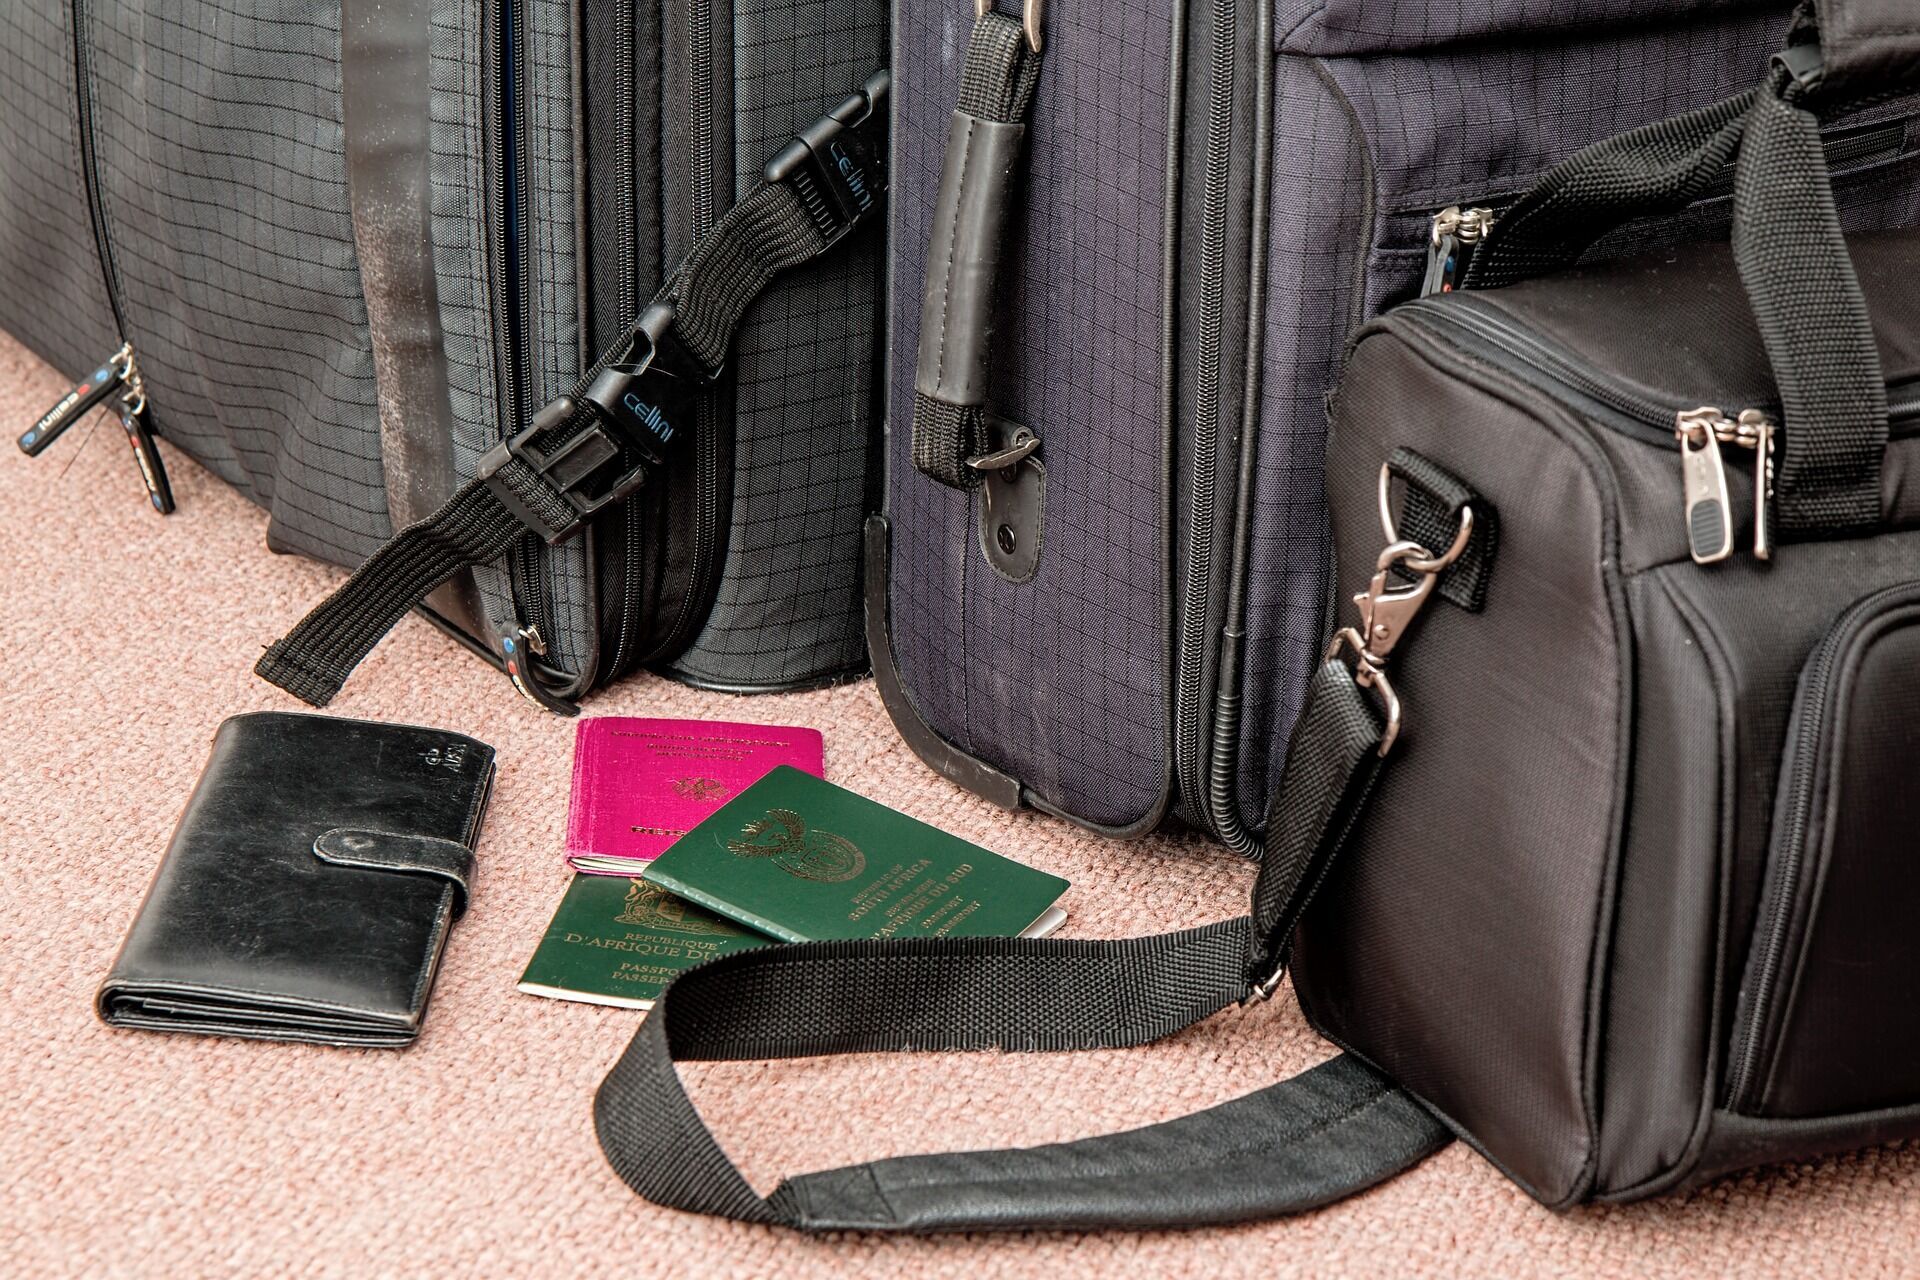 8 travel tips to help you avoid excess baggage fees